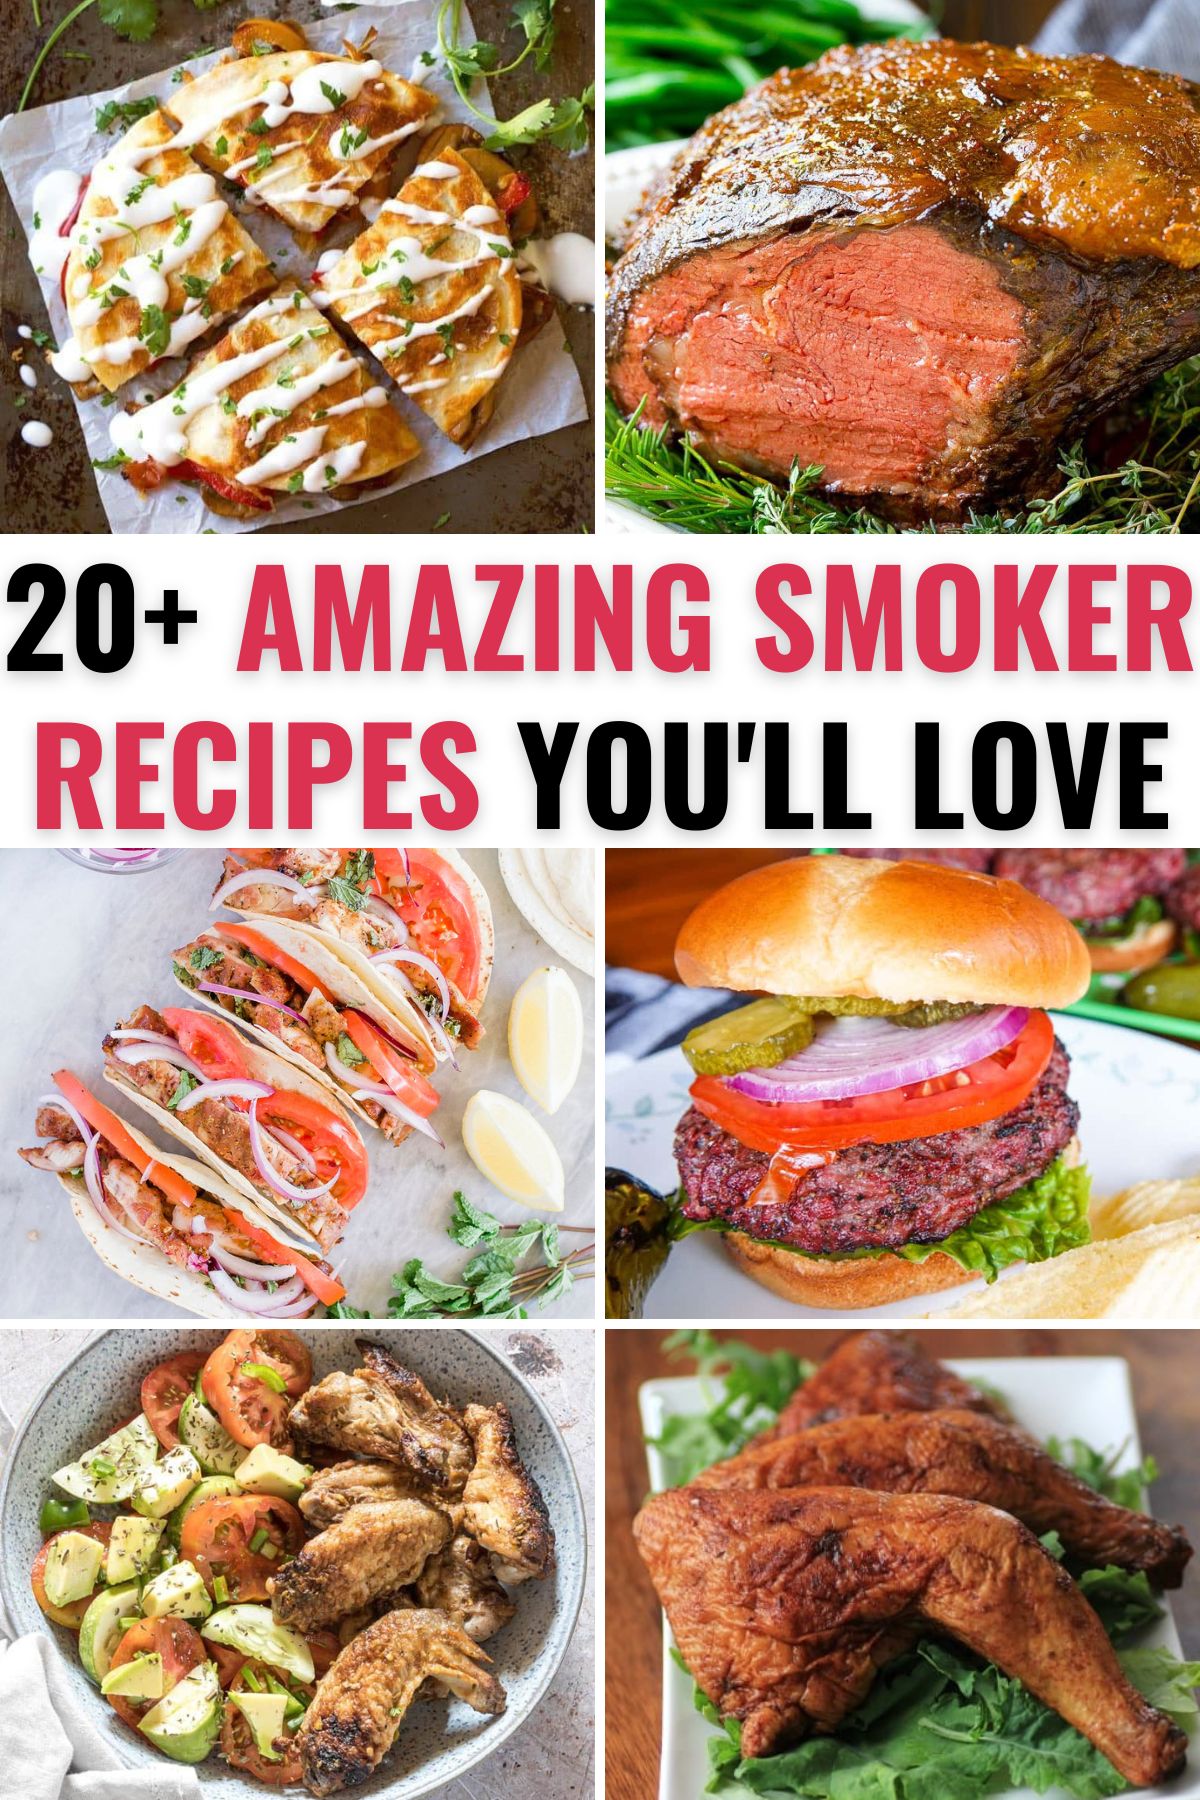 Selection of best smoker recipes